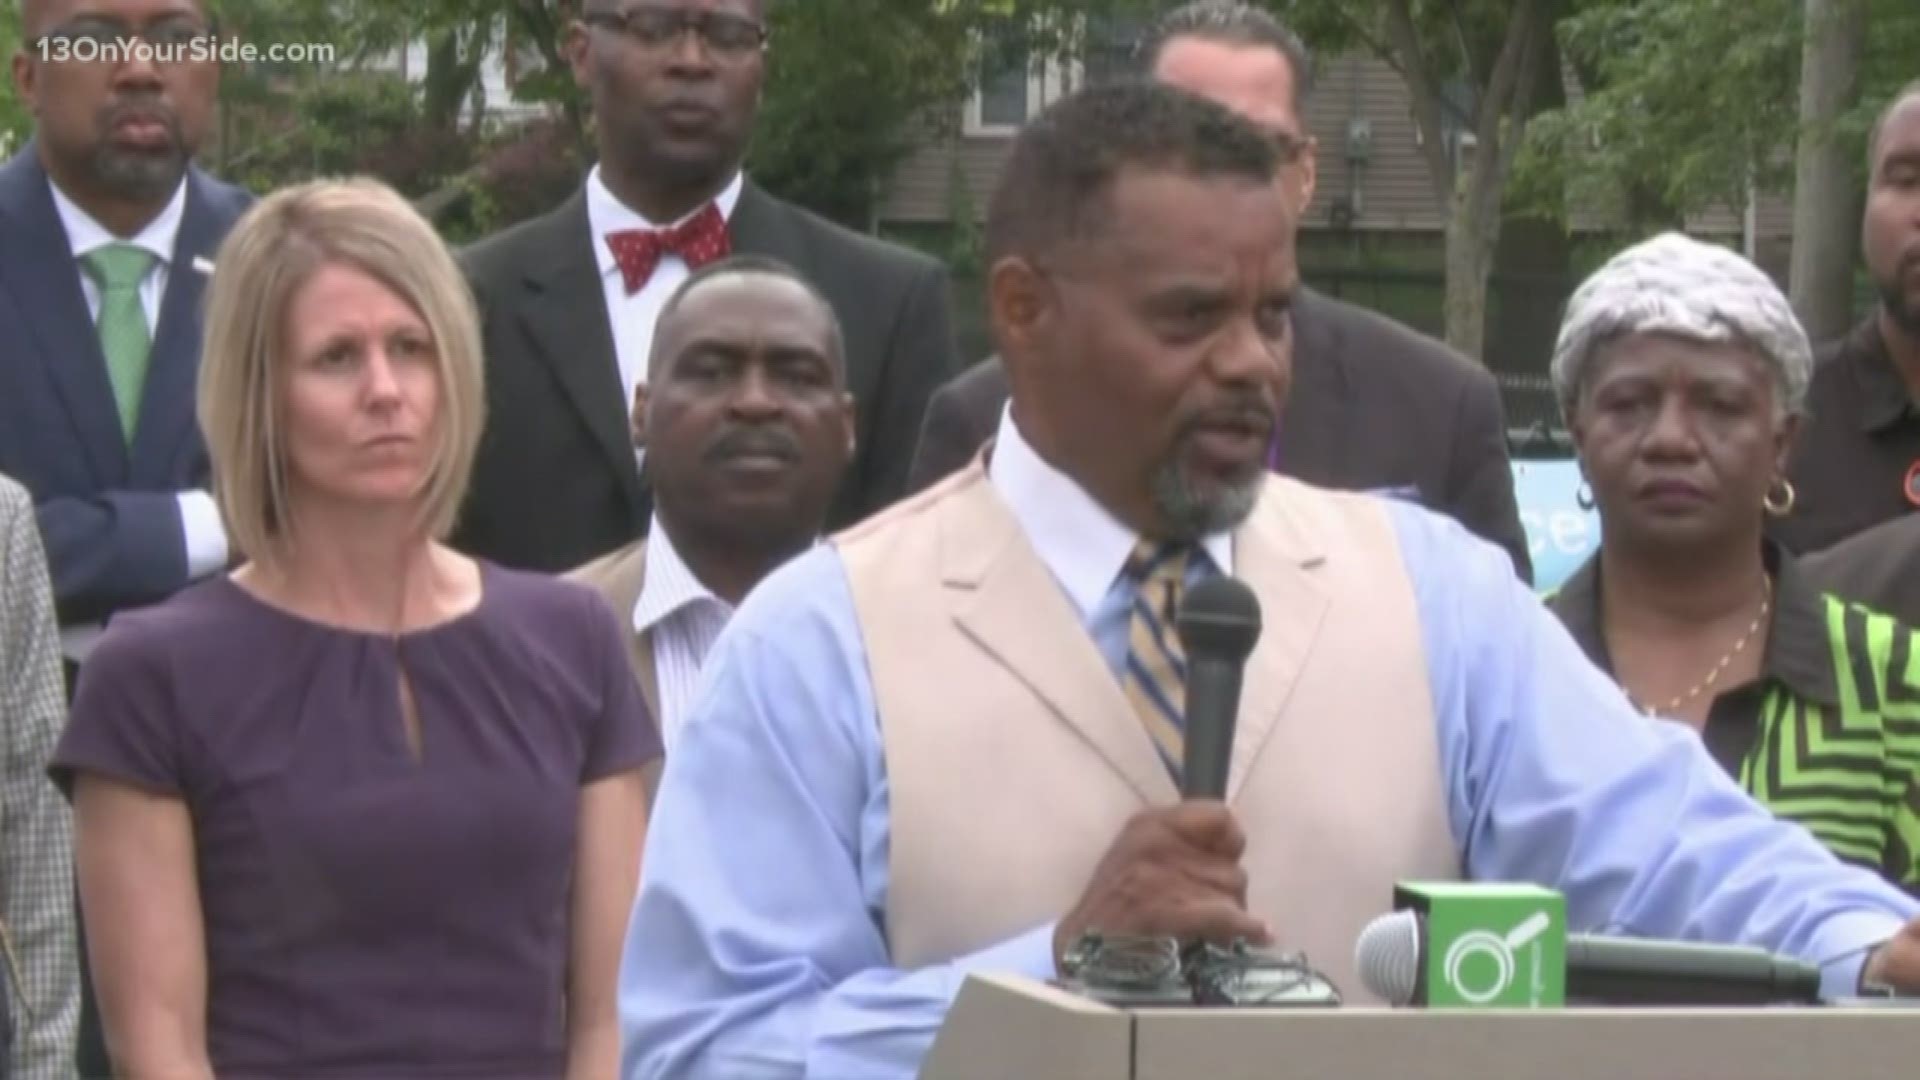 City and community leaders held a press conference at Joe Taylor Memorial Park on Friday morning to talk about the recent uptick in shootings over the past week.